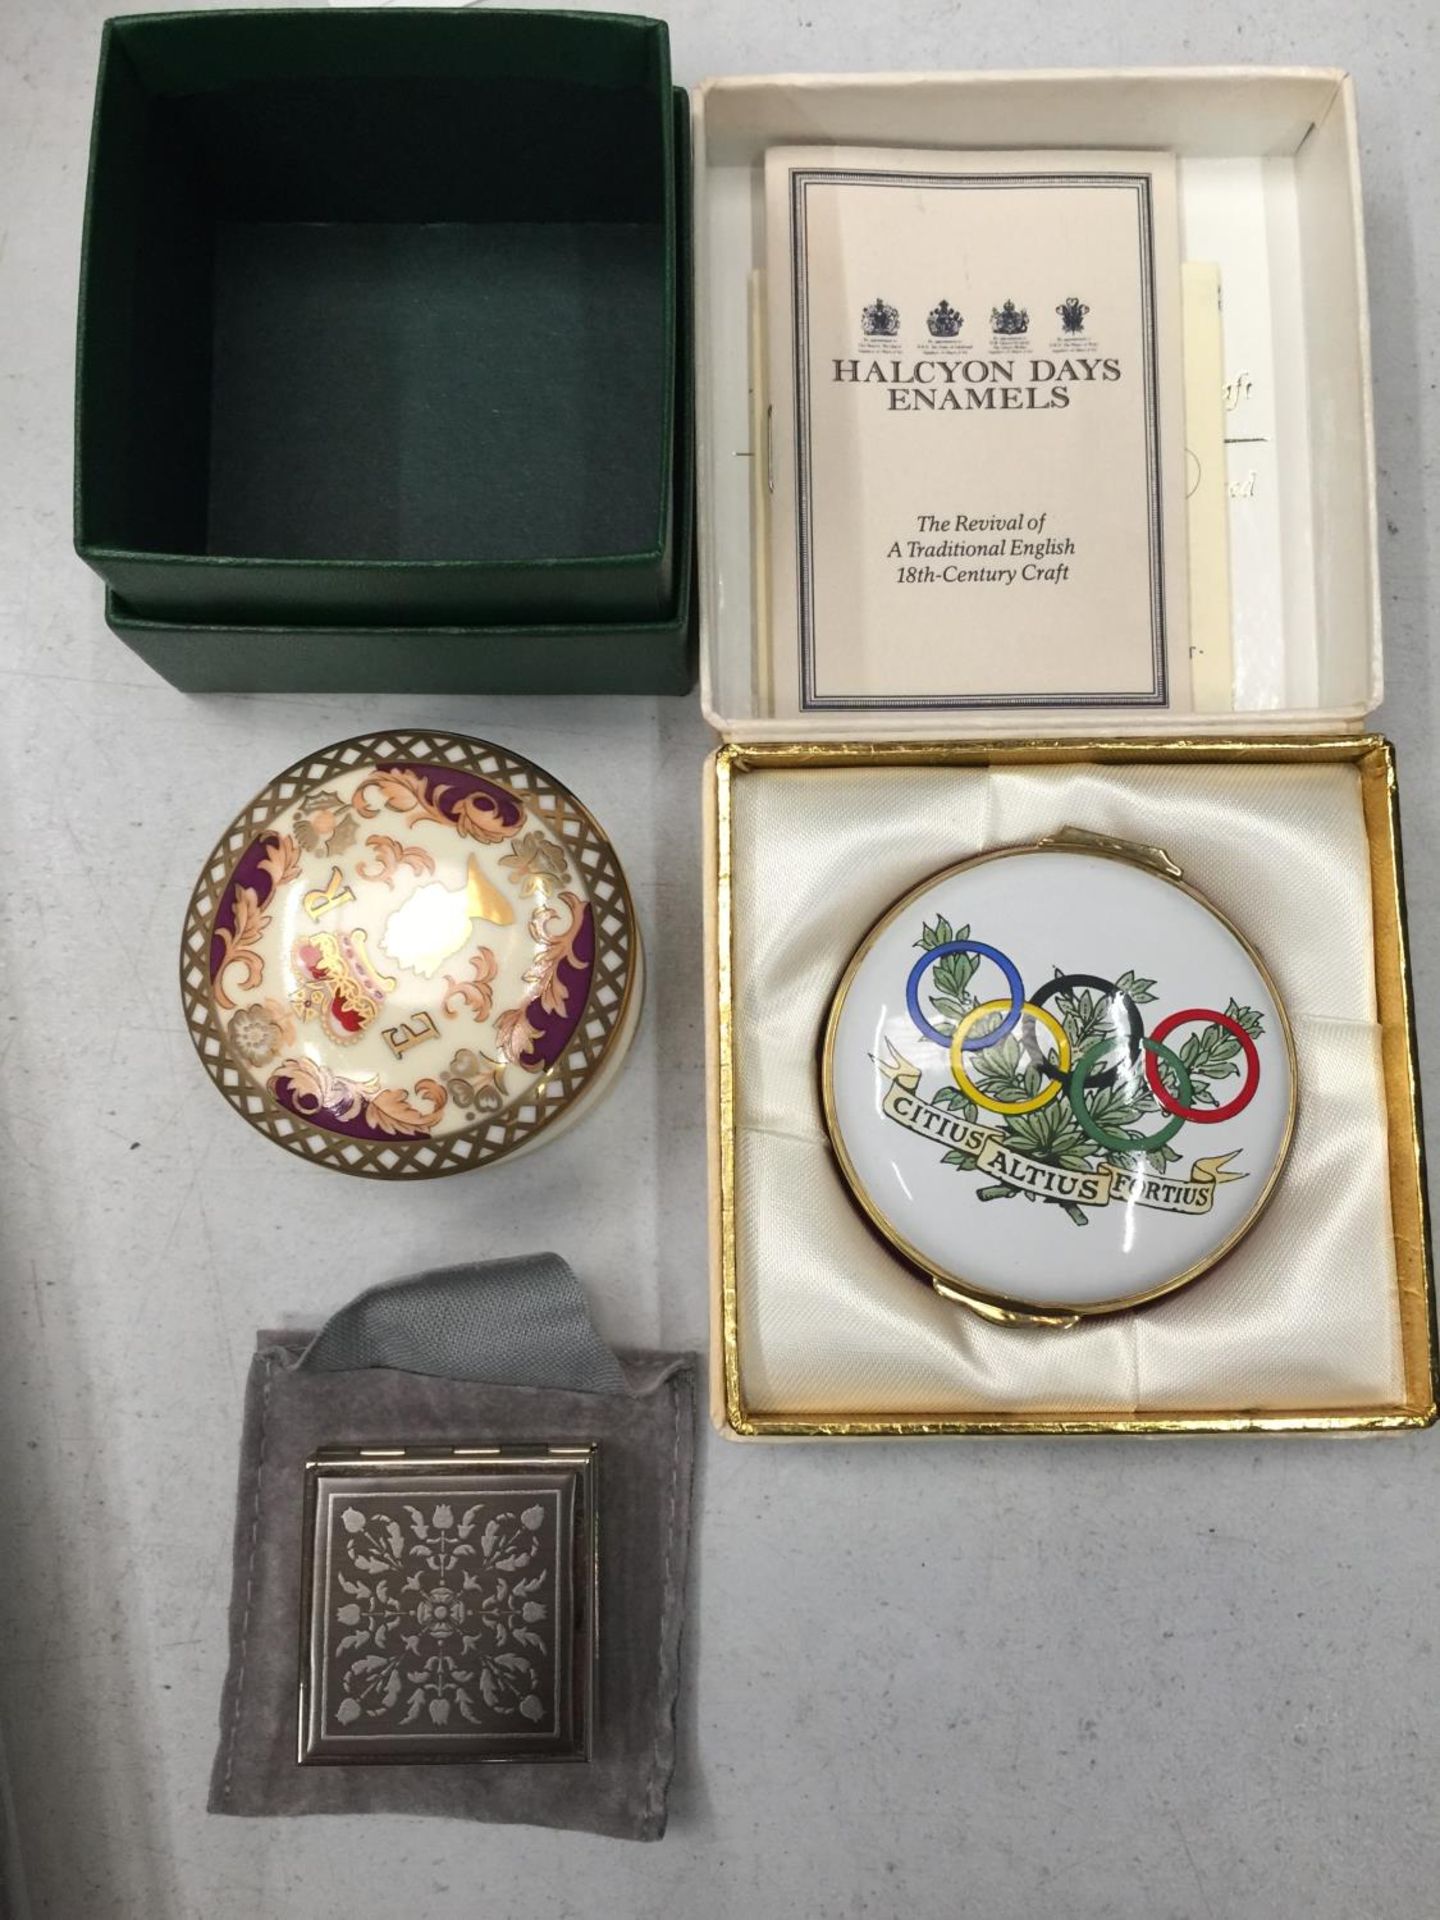 * A BOXED TRINKET BOX, GIFT TO JAMES ANDERTON FROM THE INTERNATIONAL OLYMPIC COMMITTEE, HOUSE OF